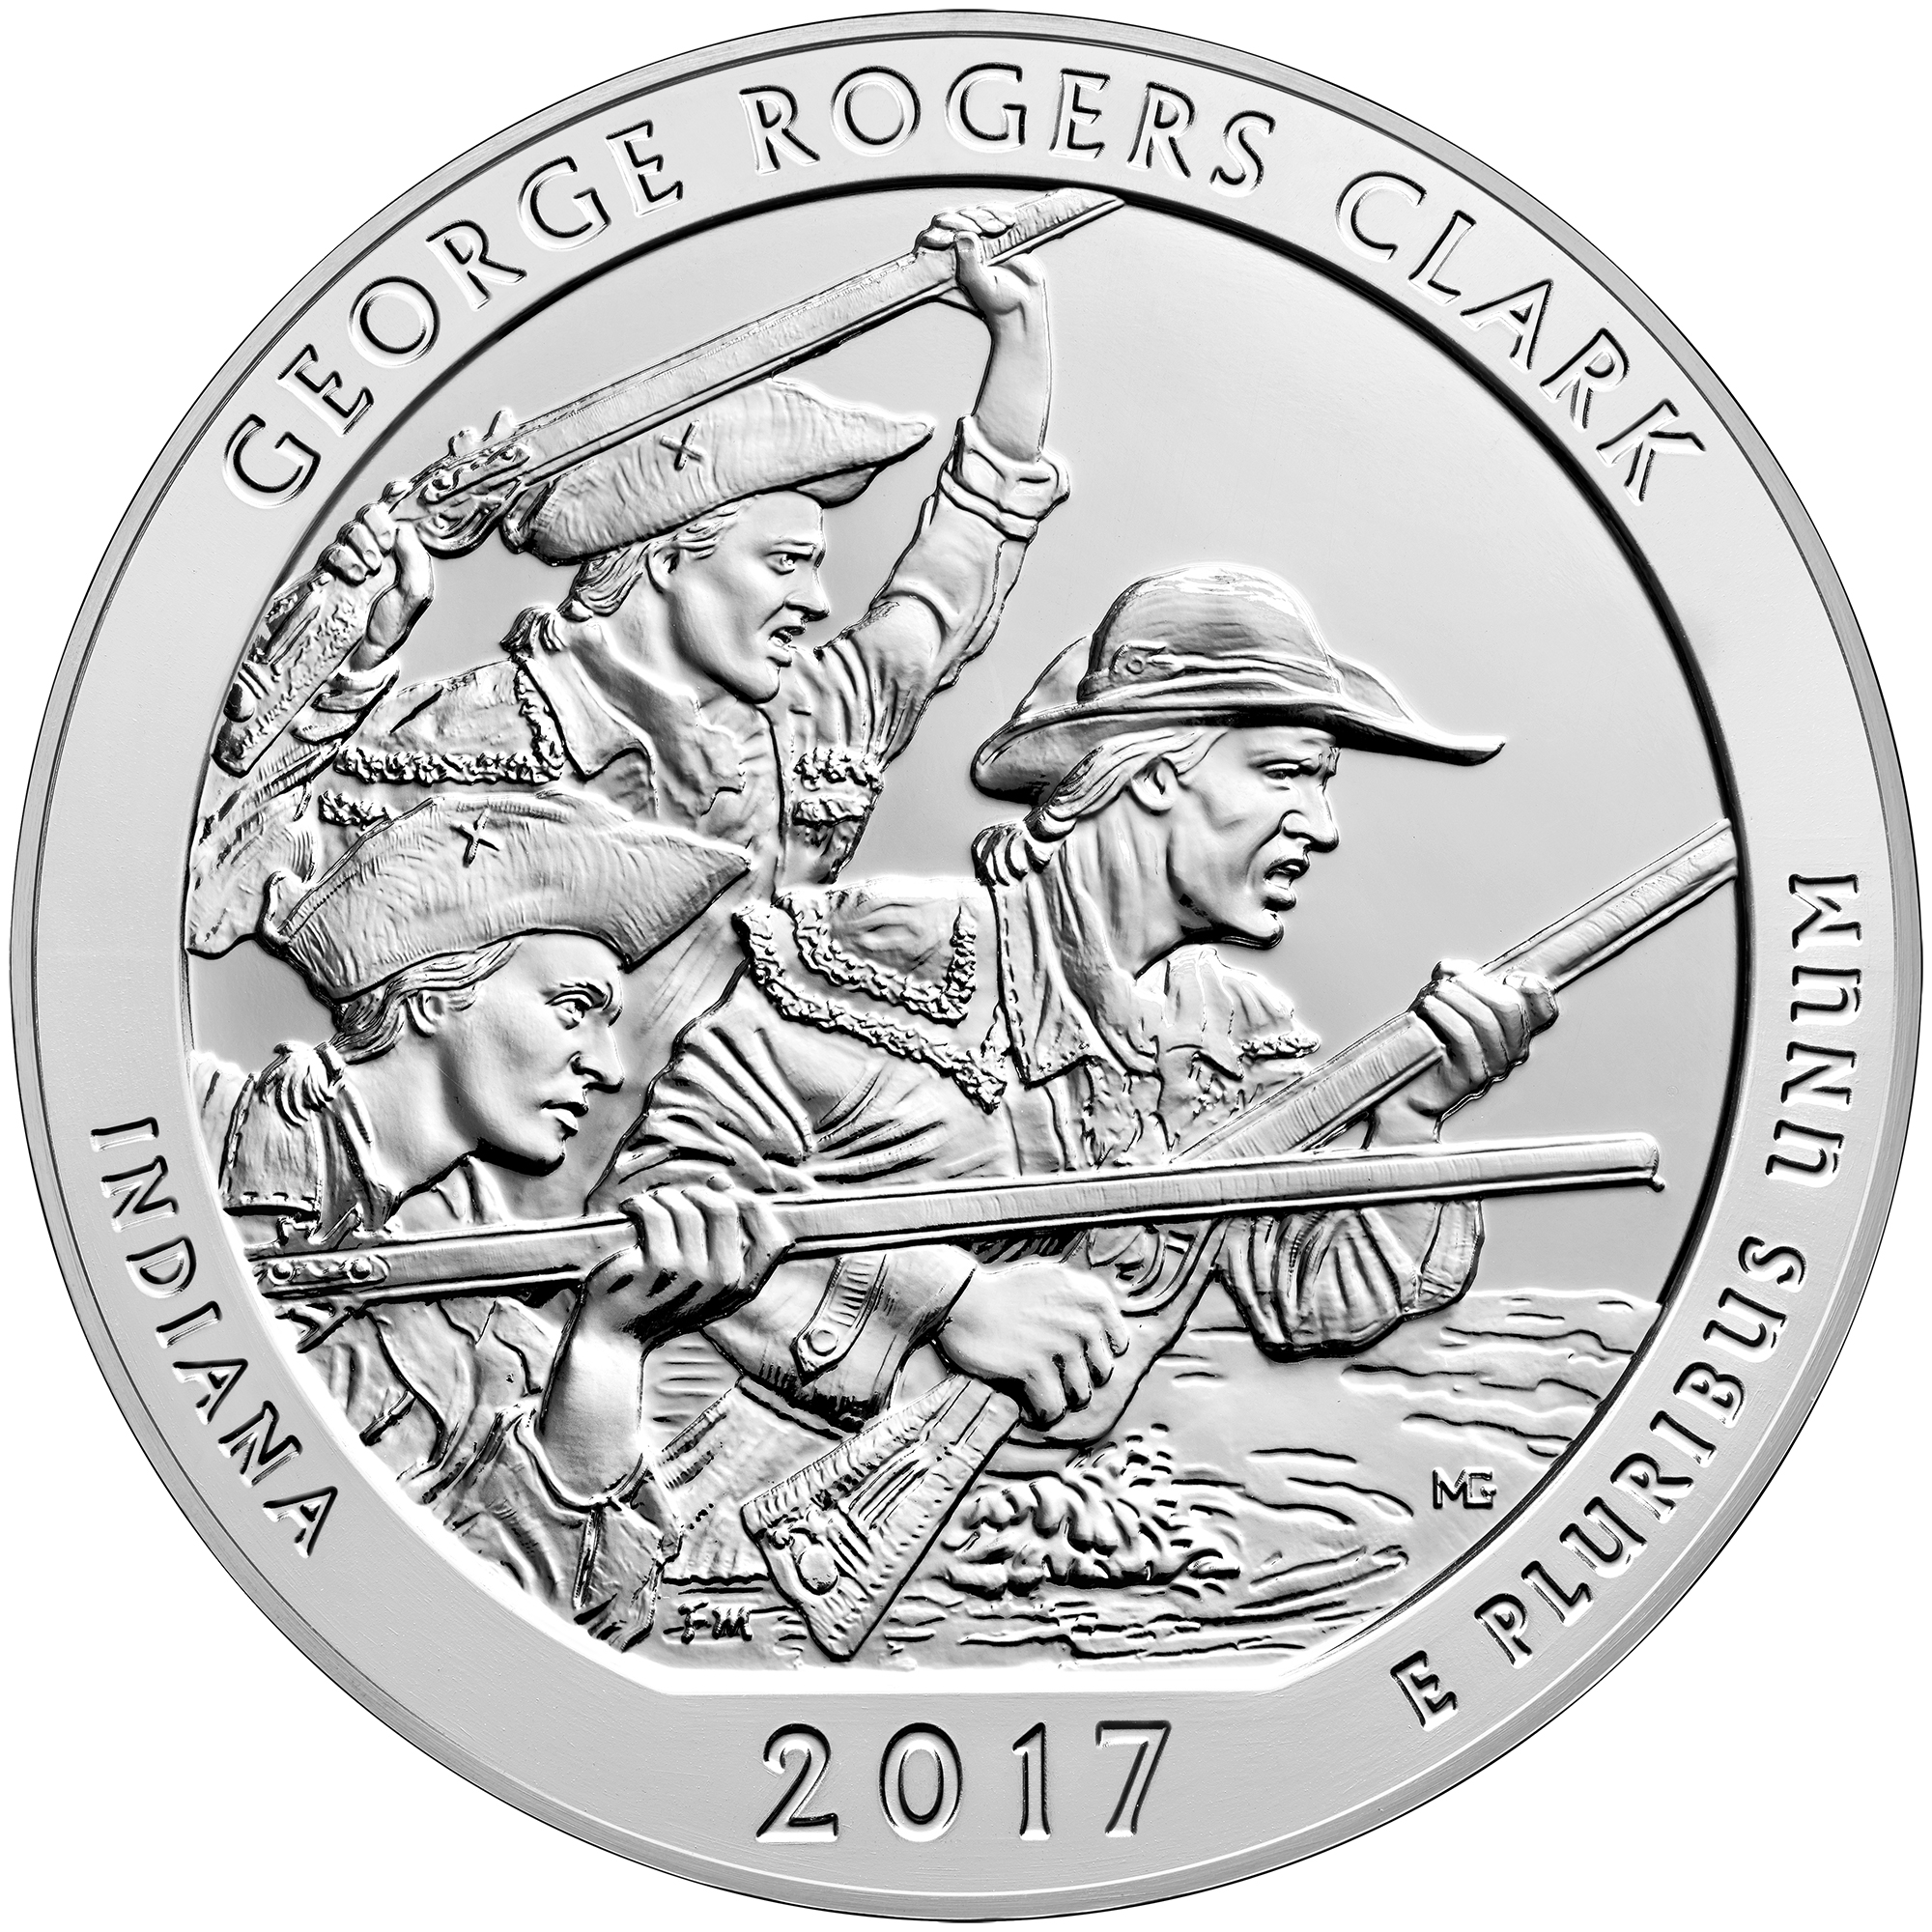 2017 America the Beautiful Quarters Five Ounce Silver Bullion Coin George Rogers Clark Indiana Reverse